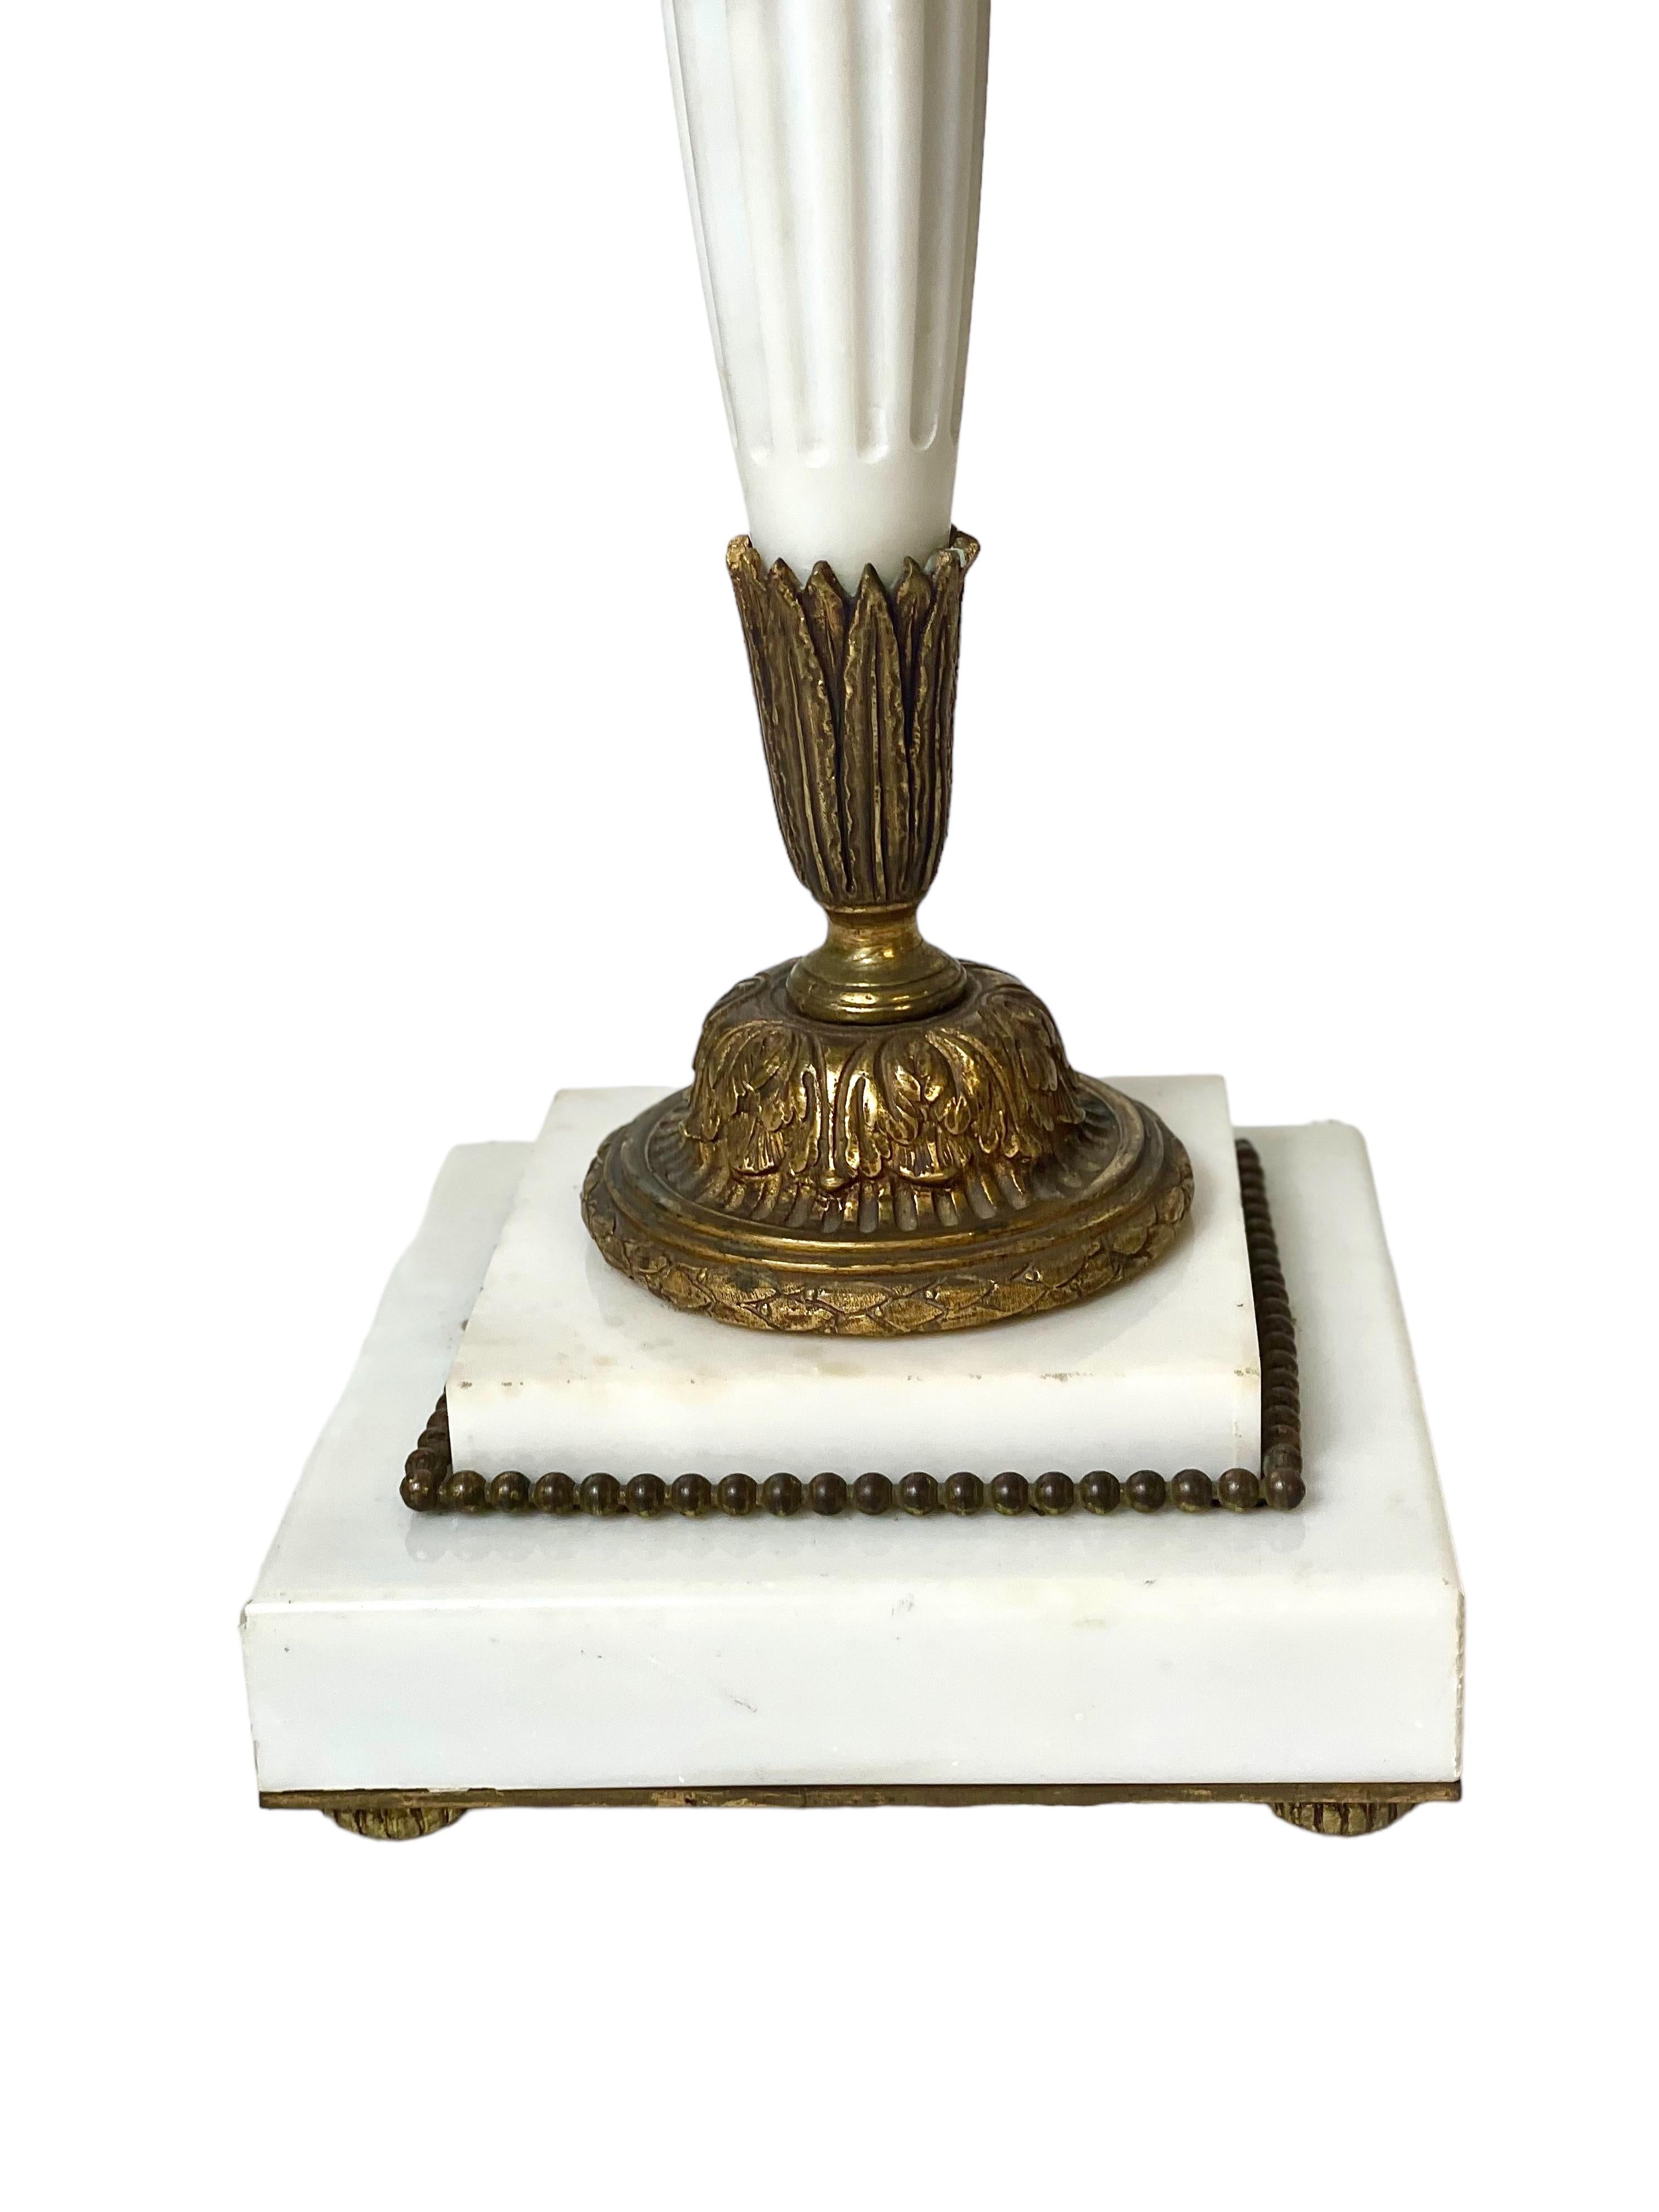 An unusual and imposing Empire style table lamp in white Italian Carrara marable, with ornate gilt bronze decoration. Designed in the form of an arrow quiver, complete with bronze 'fletchings' at the top, the central part of the stem is finely